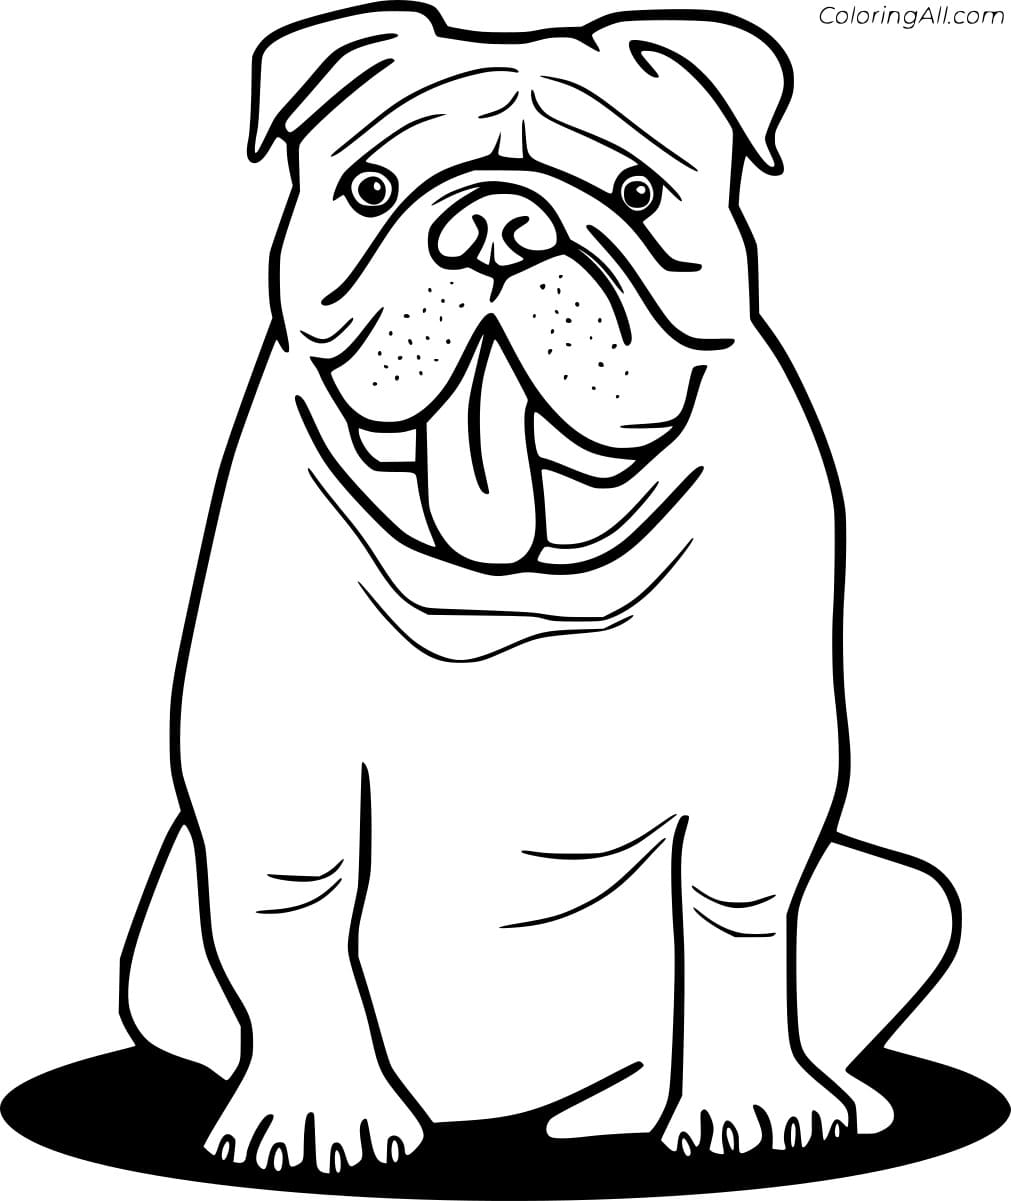 Bulldog In The Puddle Coloring Page